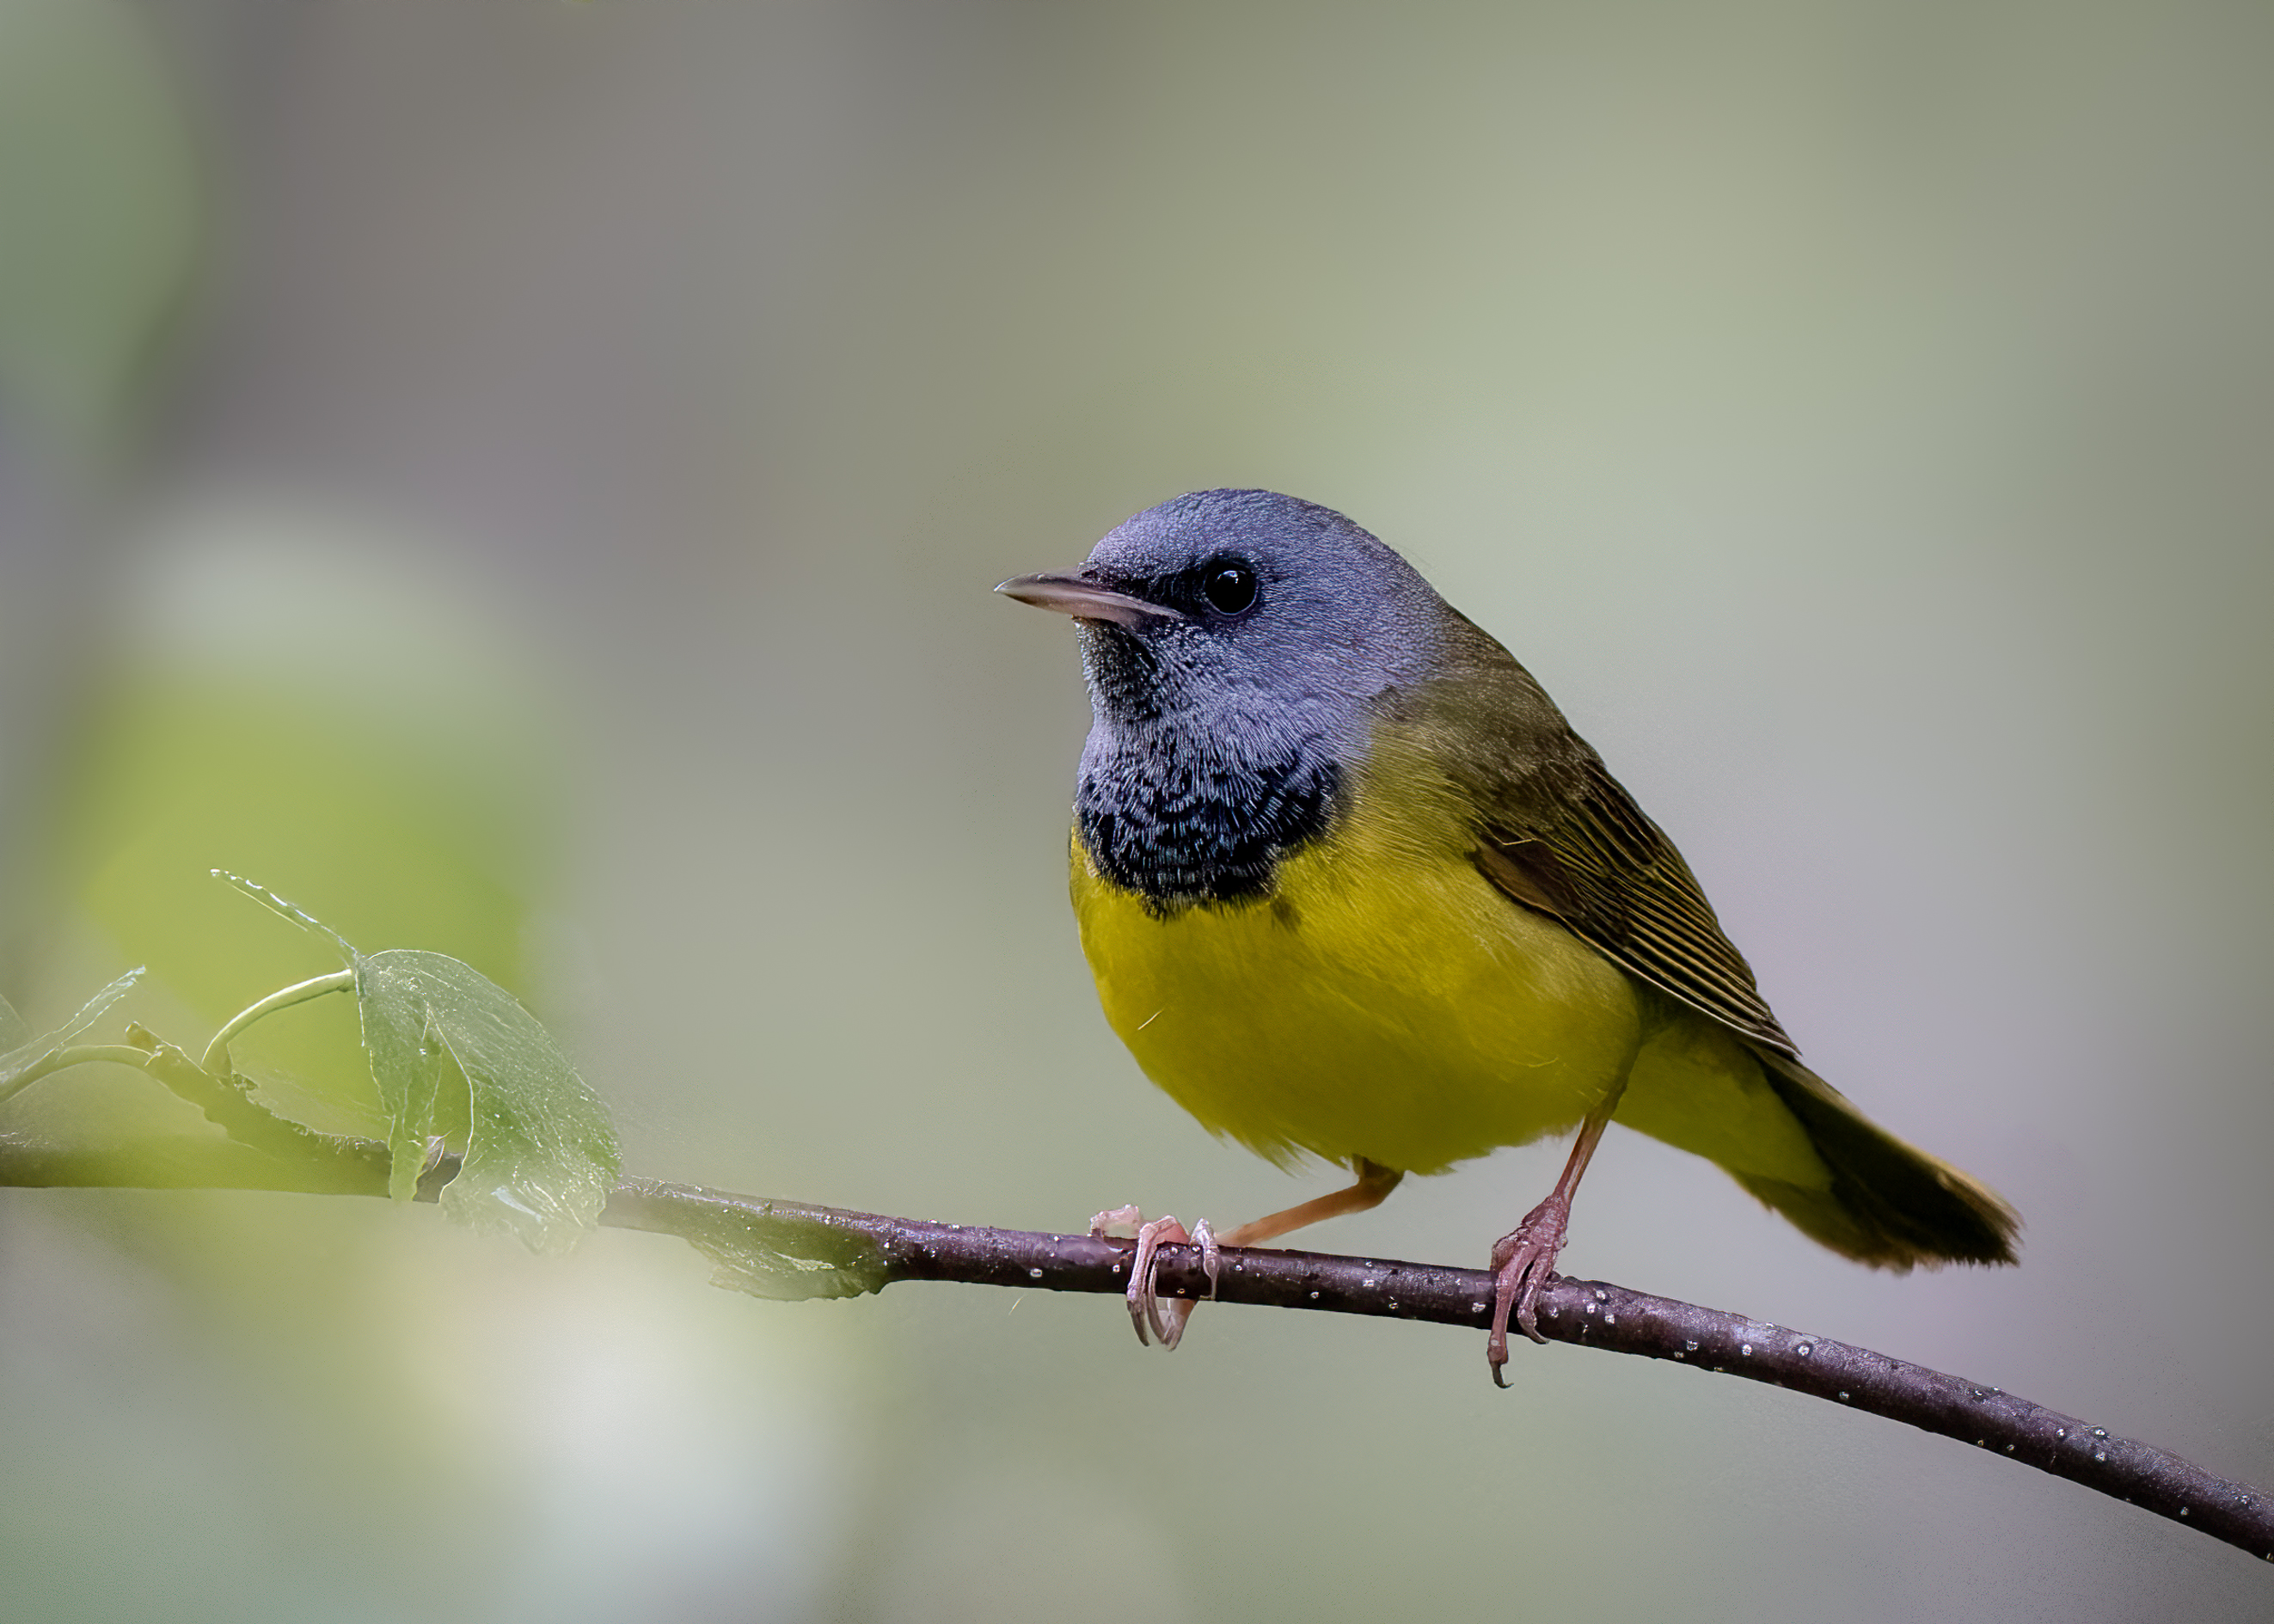 A yellow and grey mourning warbler perched on a branch.